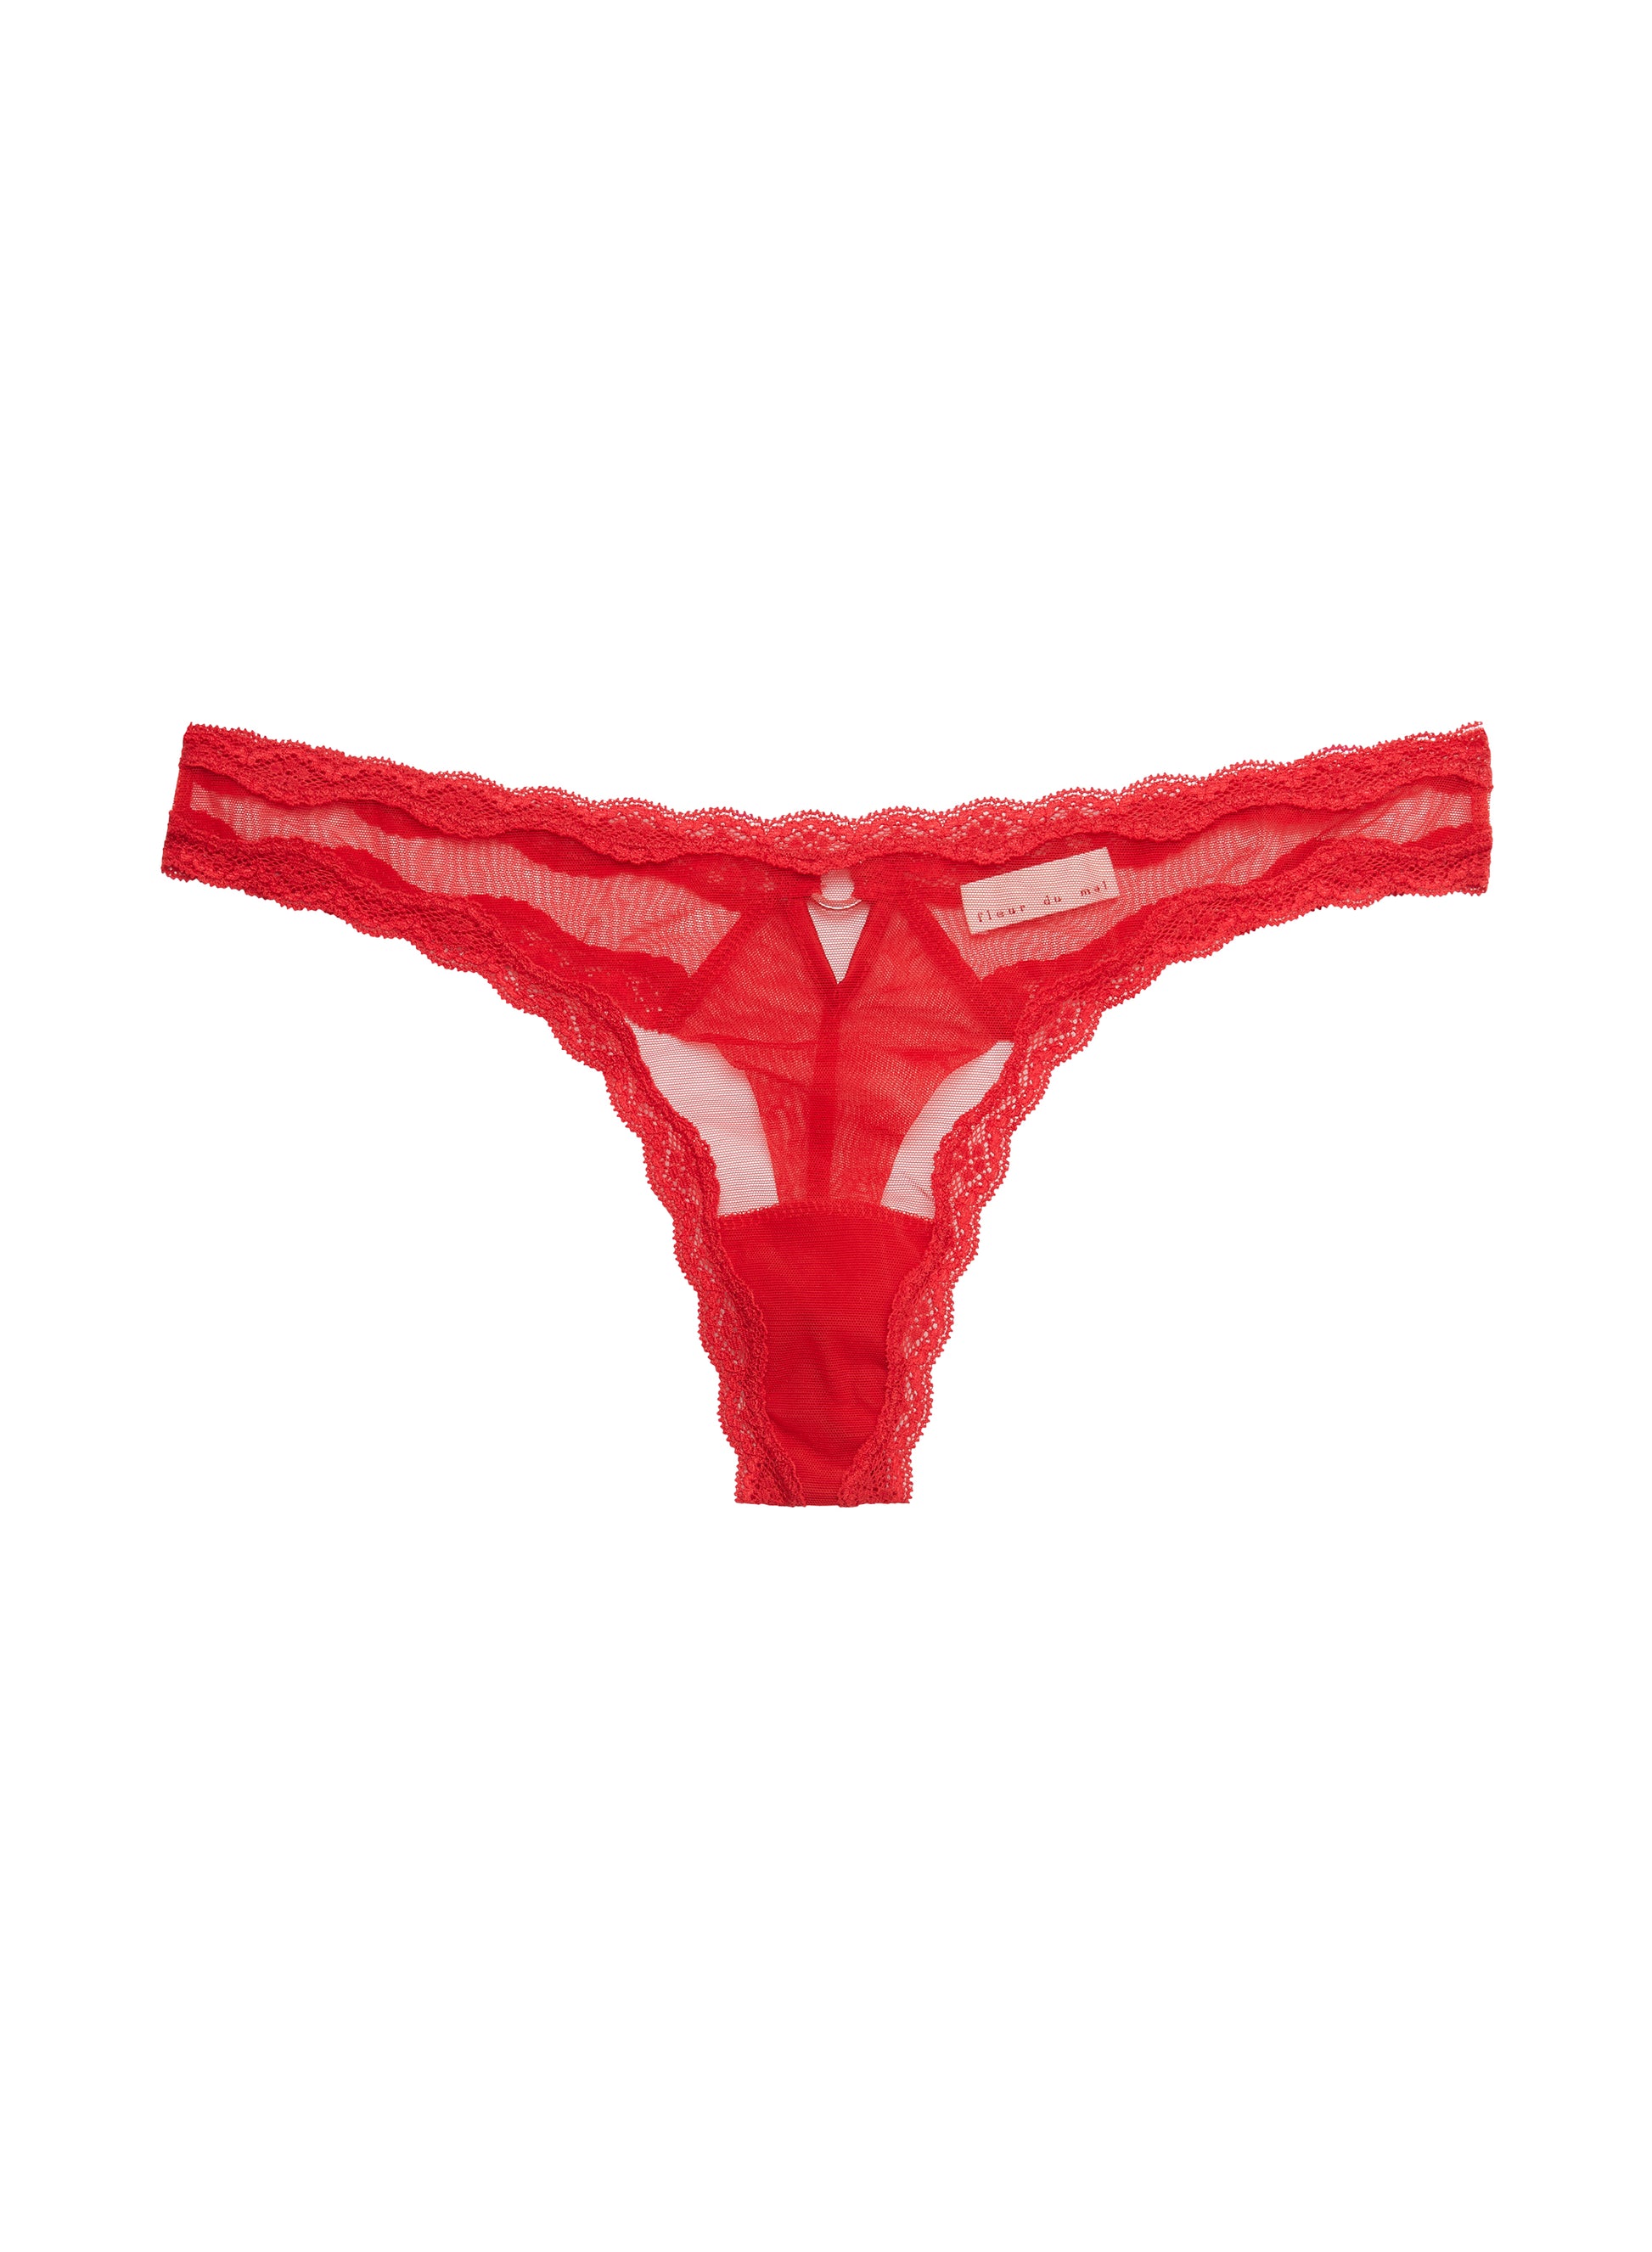  Victoria's Secret Very Sexy Fringe V-String Rhinestone Panty  Color Red New (X-Small) : Clothing, Shoes & Jewelry